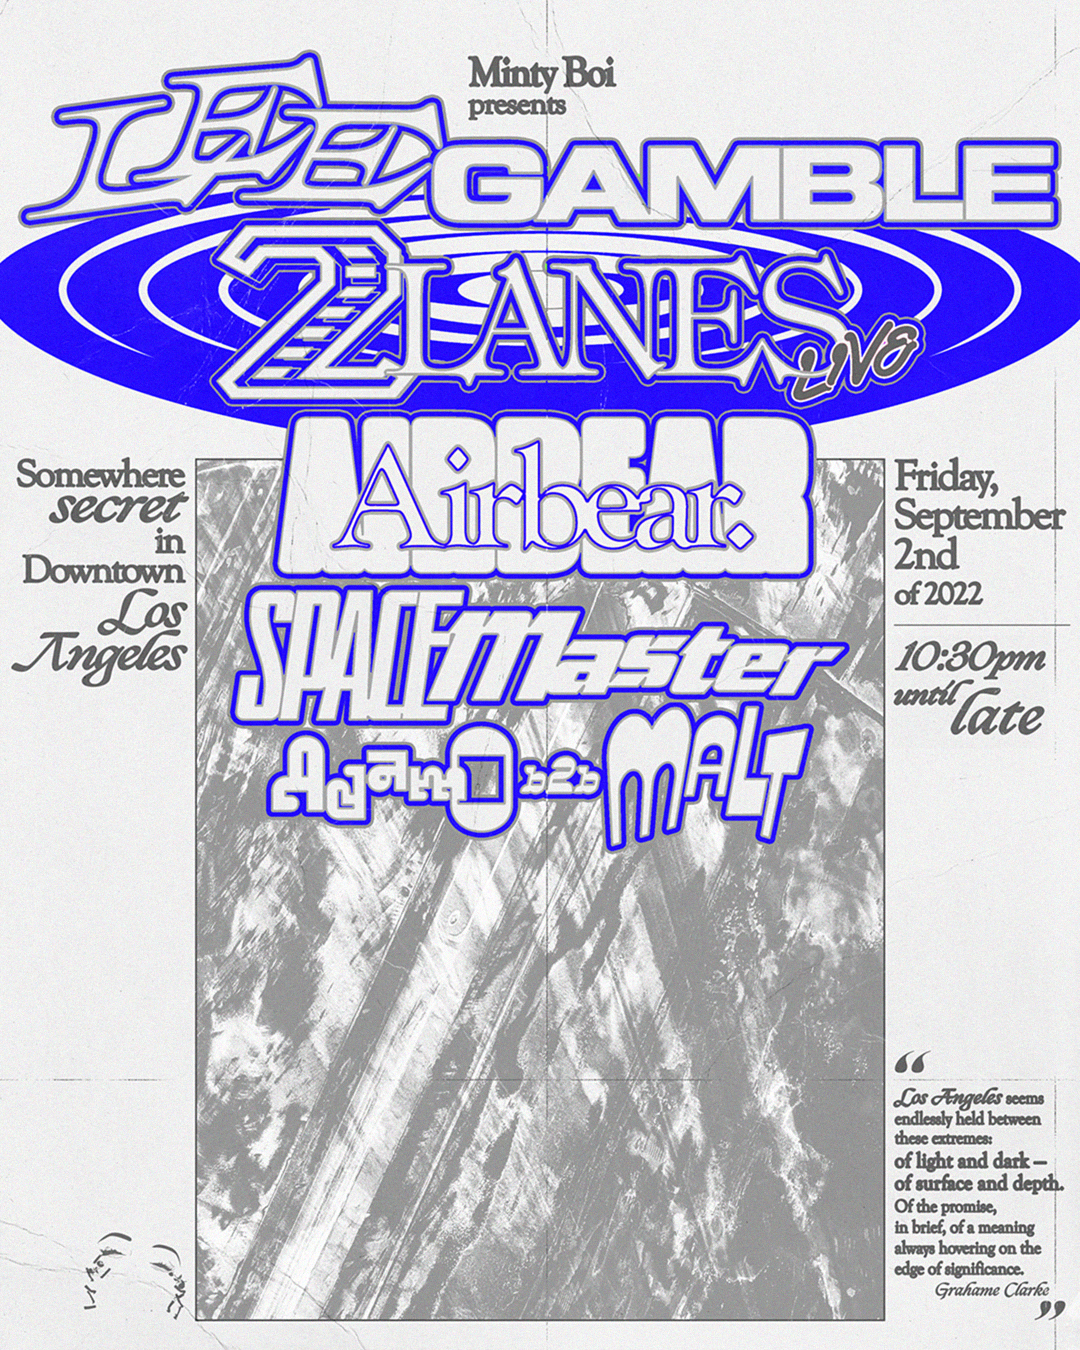 Lee Gamble, 2Lanes, Airbear  in Los Angeles [tix avail in description] - フライヤー表